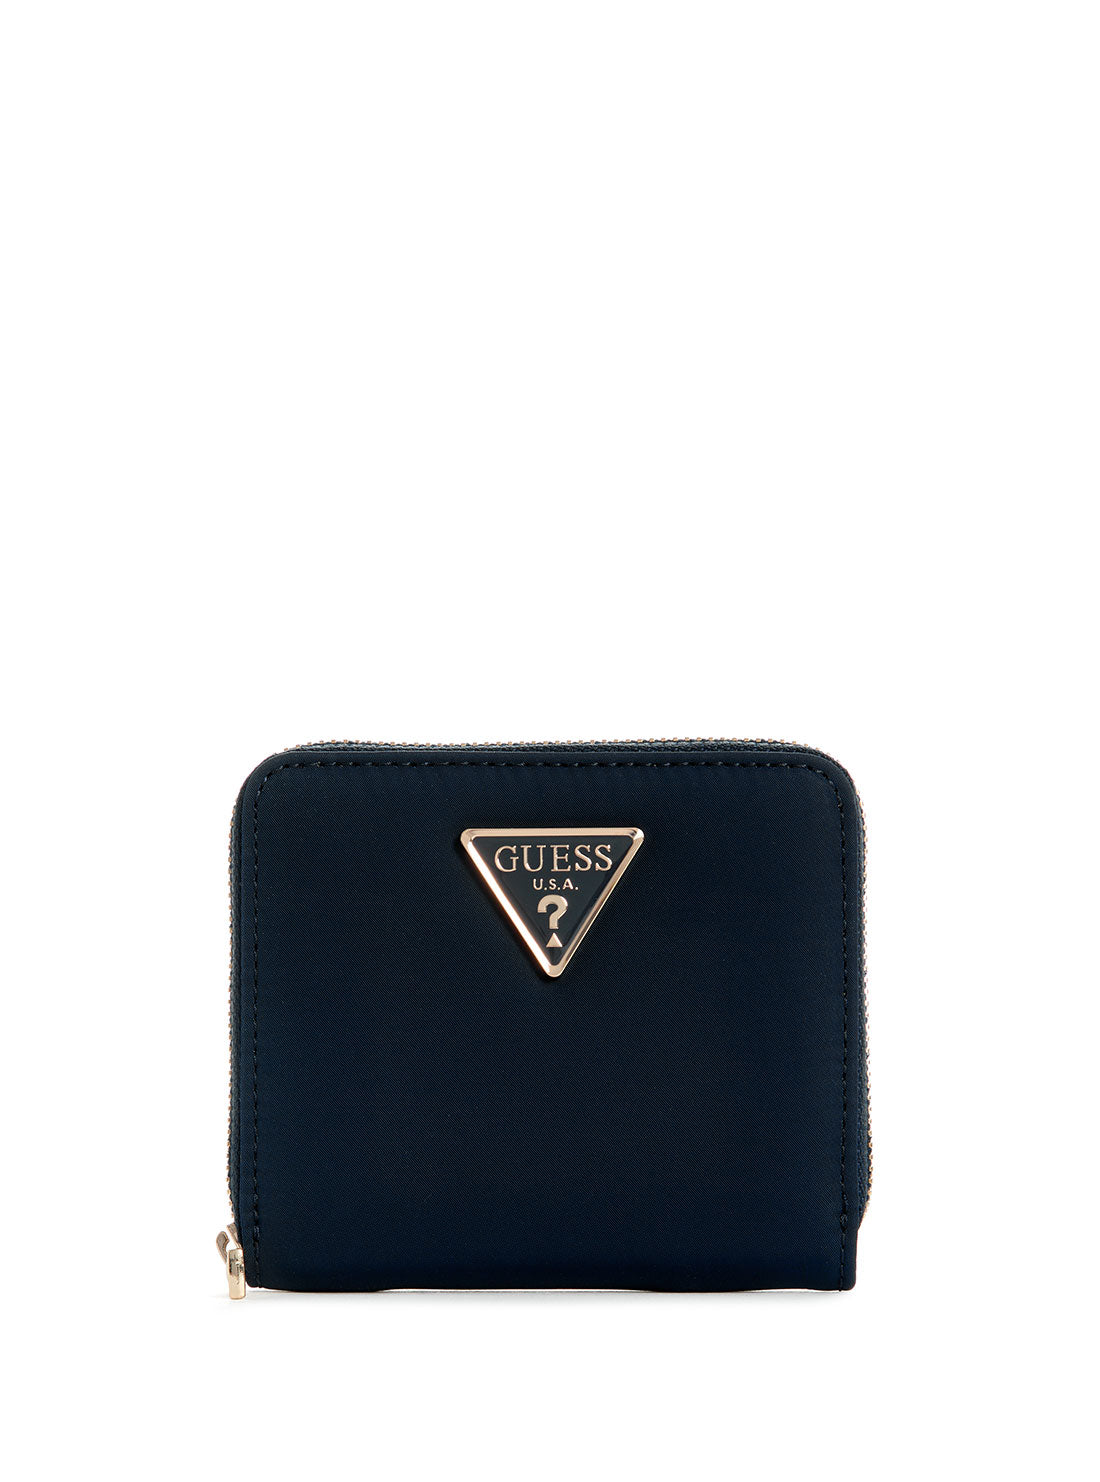 GUESS Eco Navy Gemma Small Wallet front view